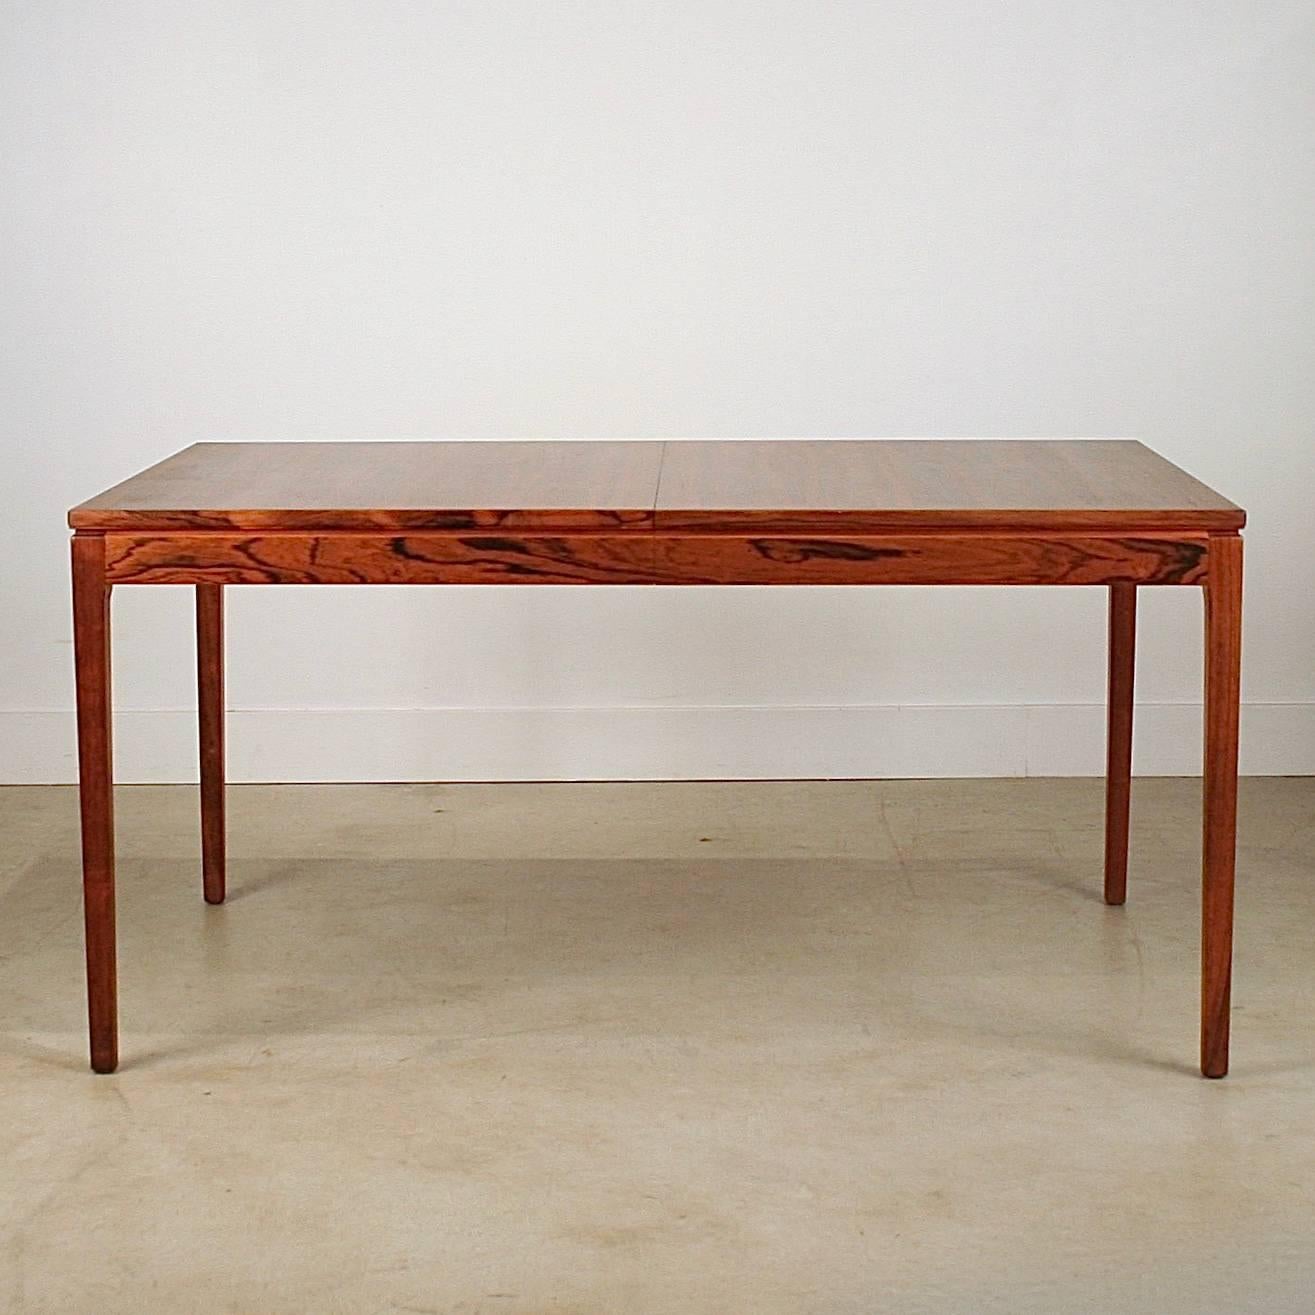 Stunning vintage Danish rosewood dining table with single leaf, stored separately. The rosewood graining throughout this piece is exceptional. Features one leaf at 16". Made in Denmark.